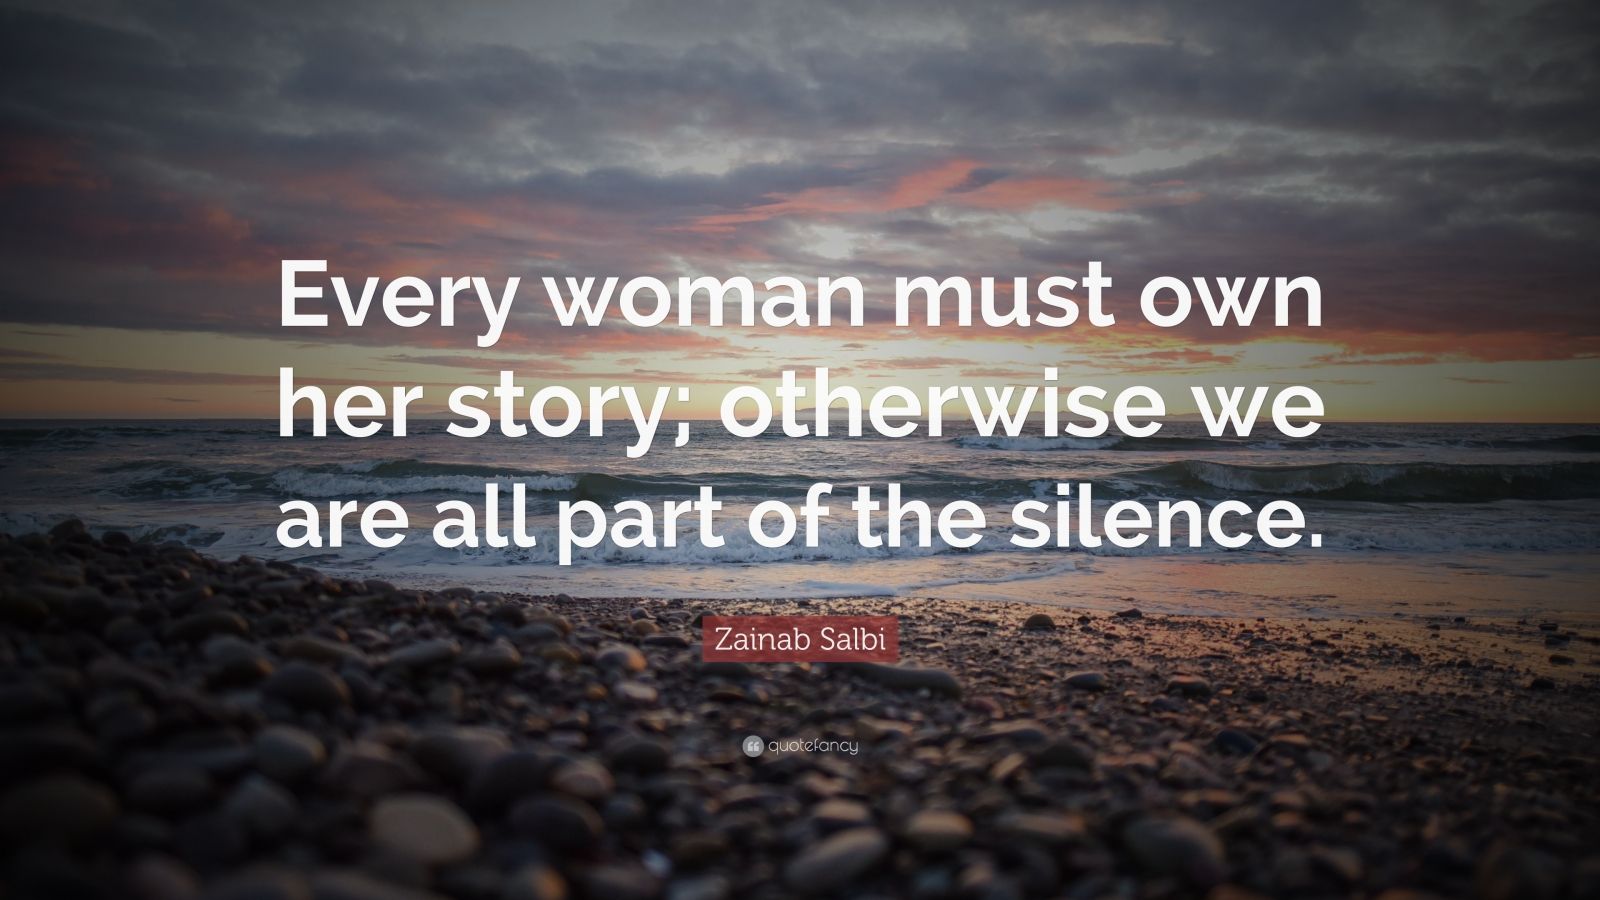 Zainab Salbi Quote: “Every woman must own her story; otherwise we are ...